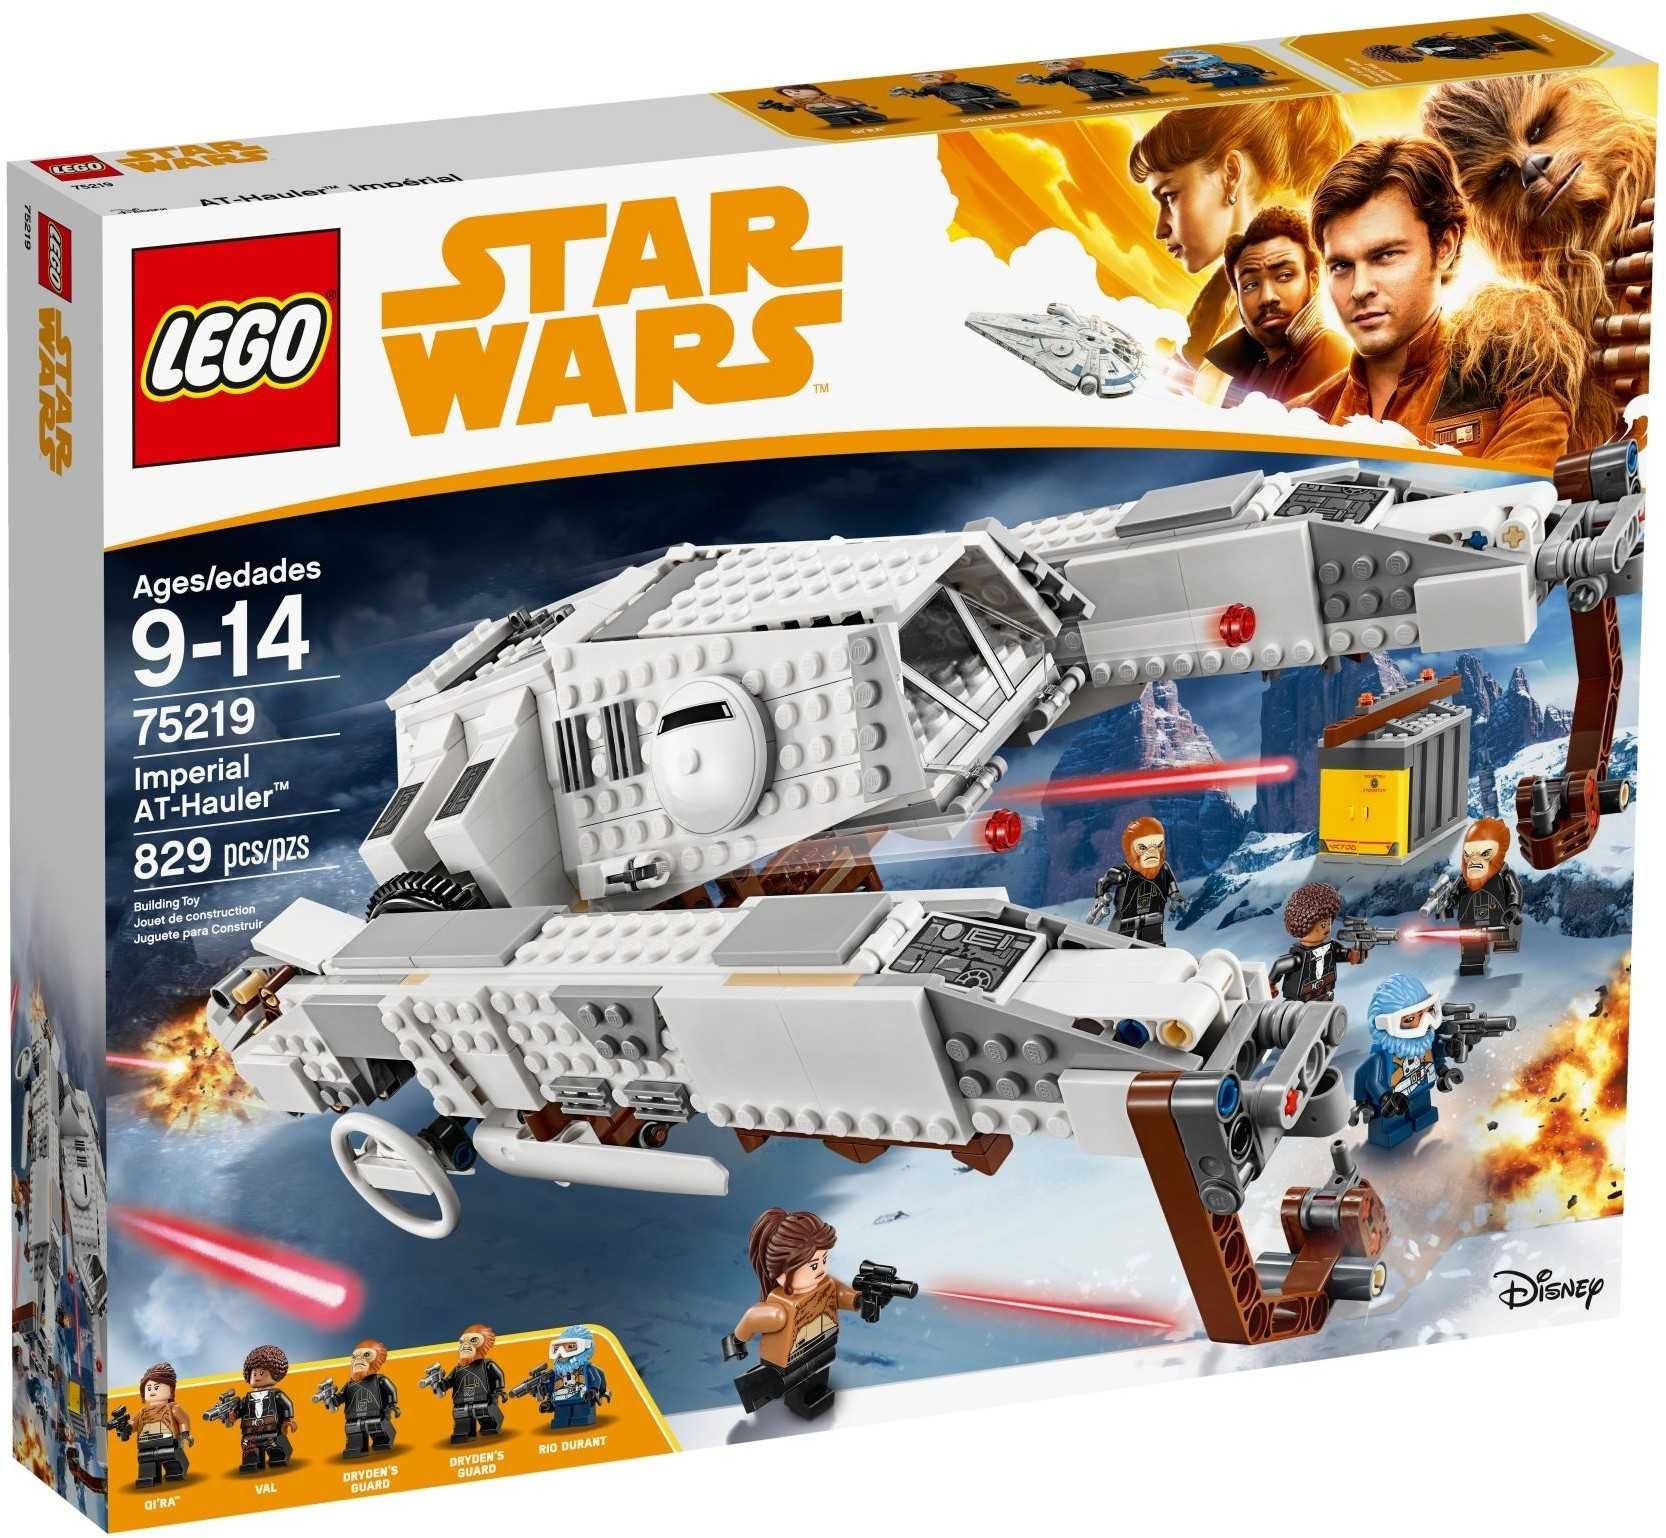 LEGO Star Wars 75219 : Imperial AT-Hauler - SOLO movie